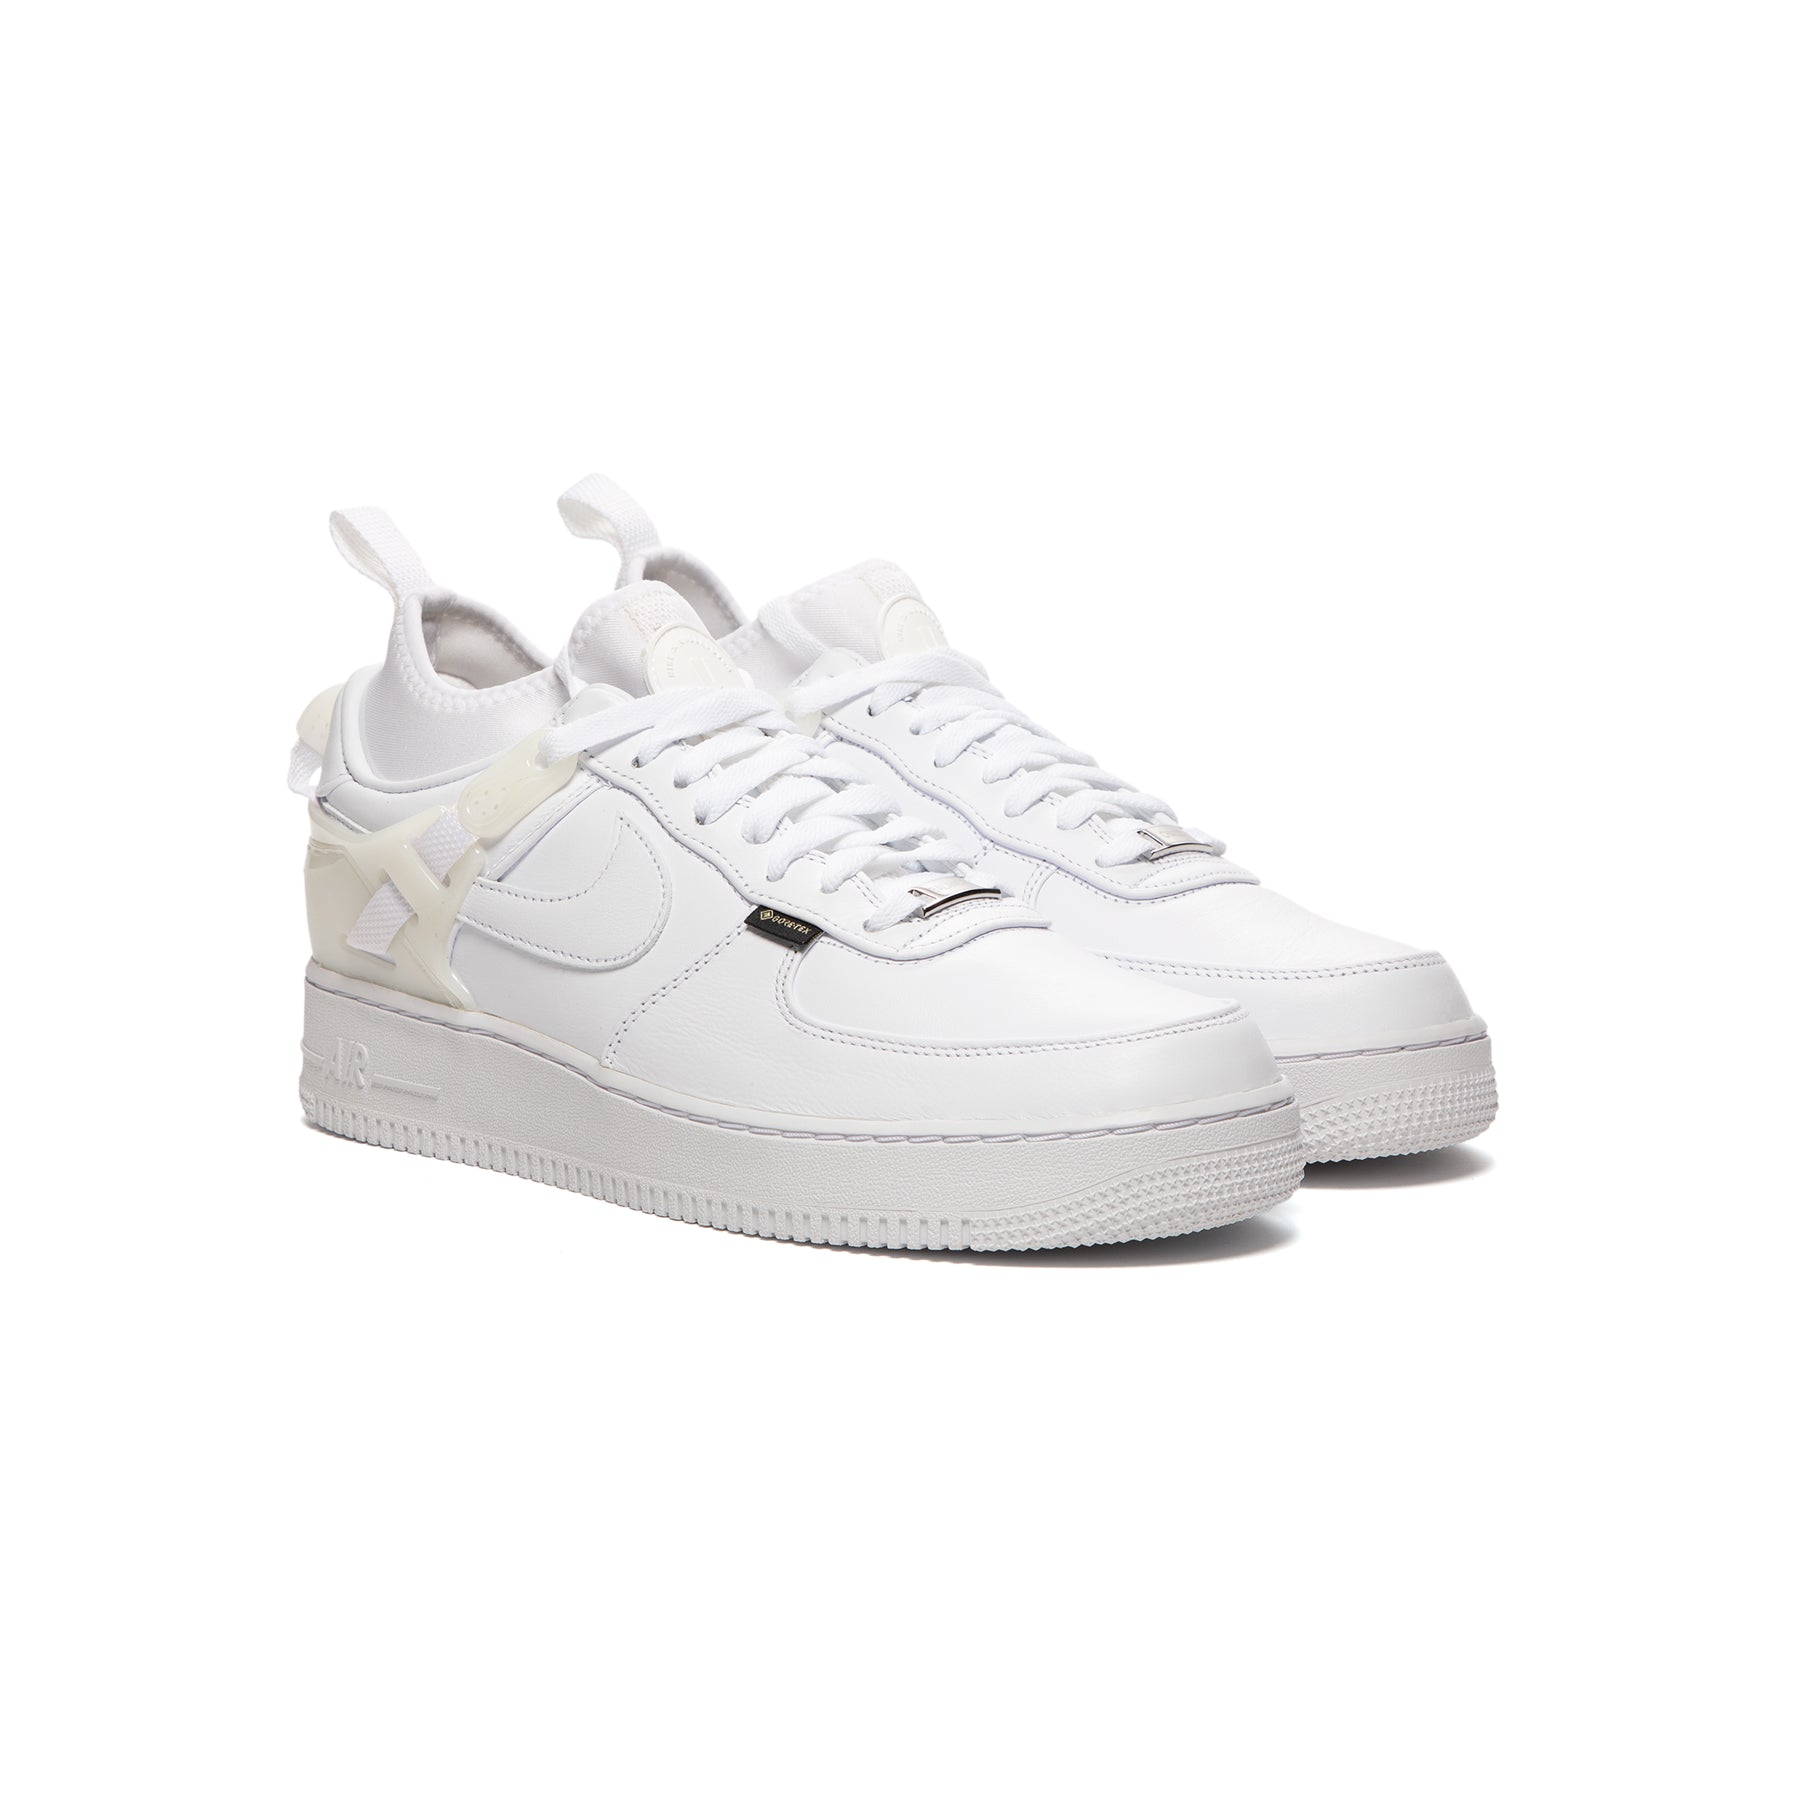 Nike x Undercover Air Force 1 Low SP - White / Sail 10